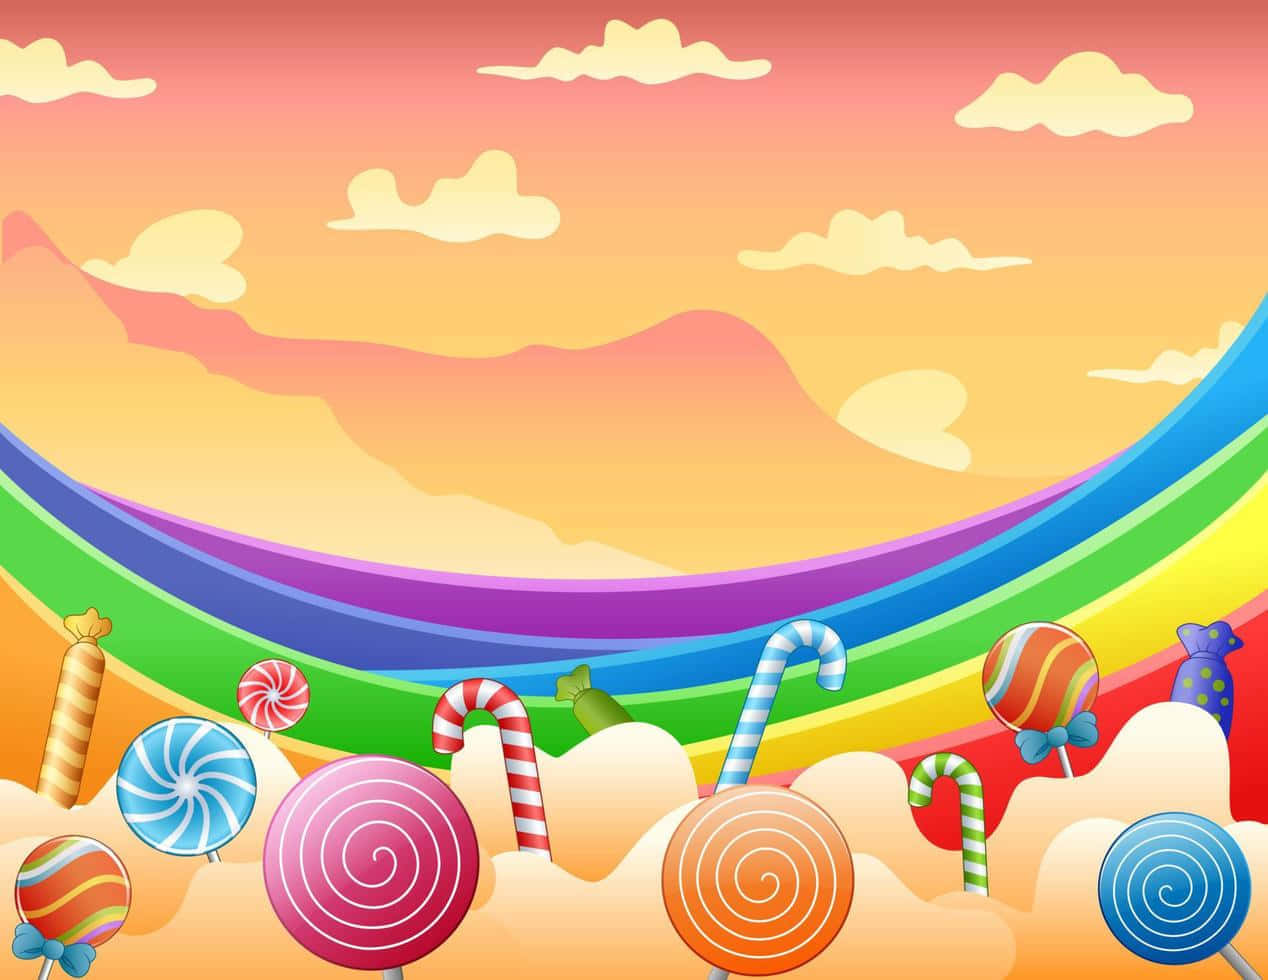 "Travel Through Sweet Adventures In Candyland!"